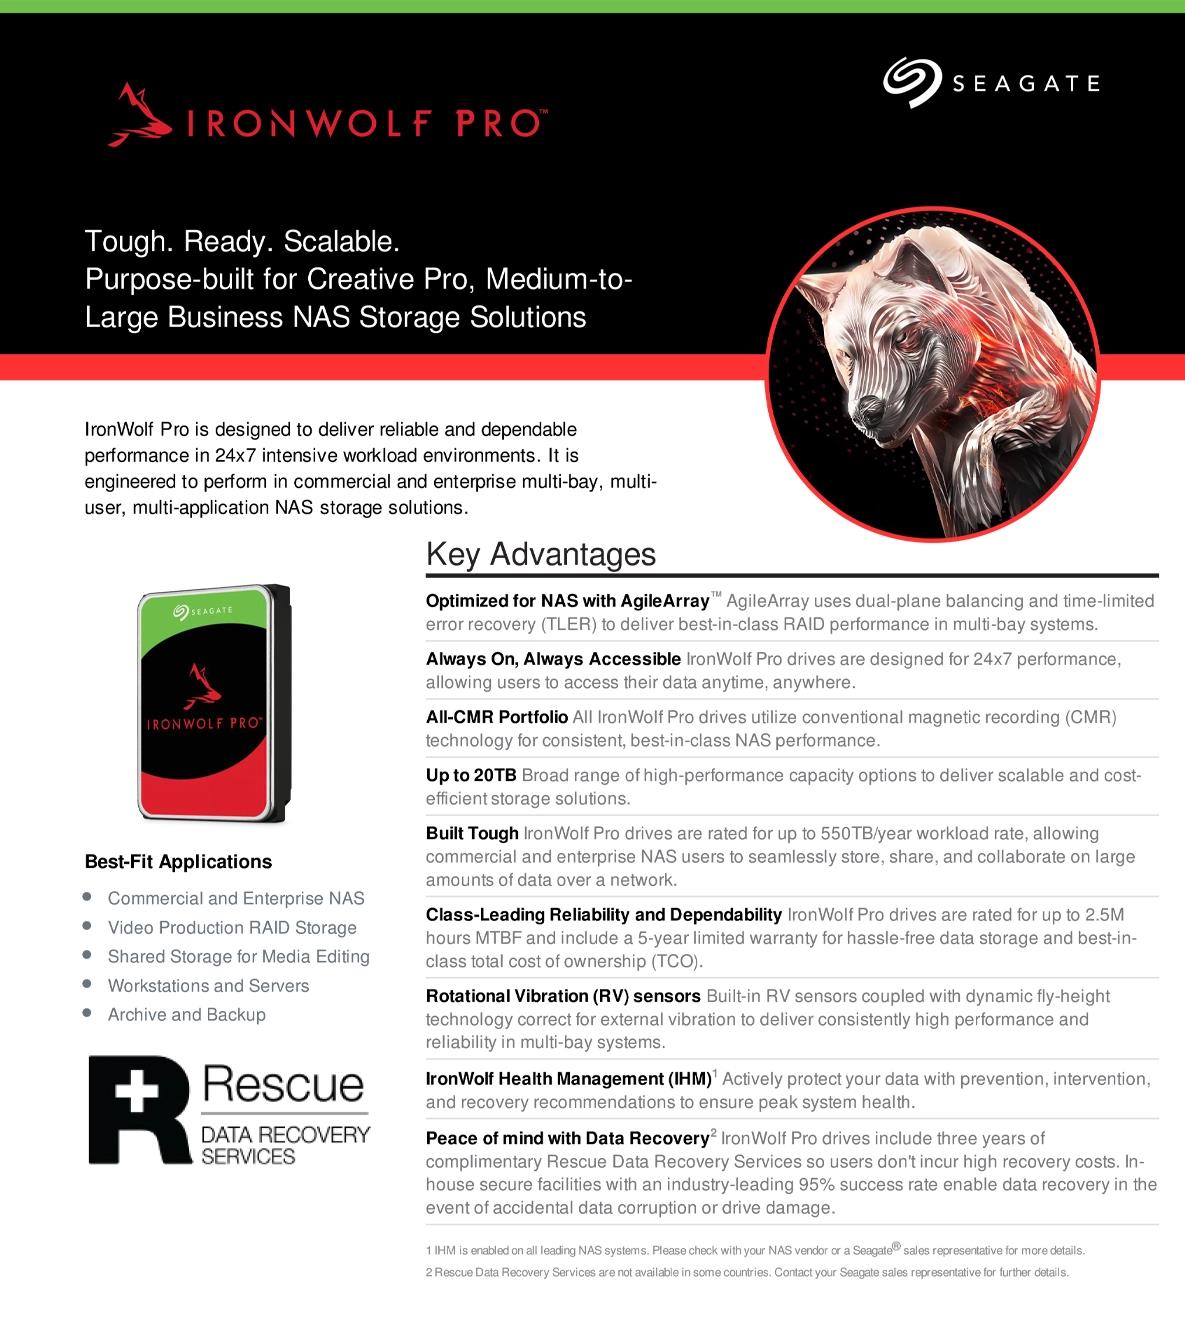 A large marketing image providing additional information about the product Seagate IronWolf Pro 3.5" NAS HDD - 22TB 512MB - Additional alt info not provided